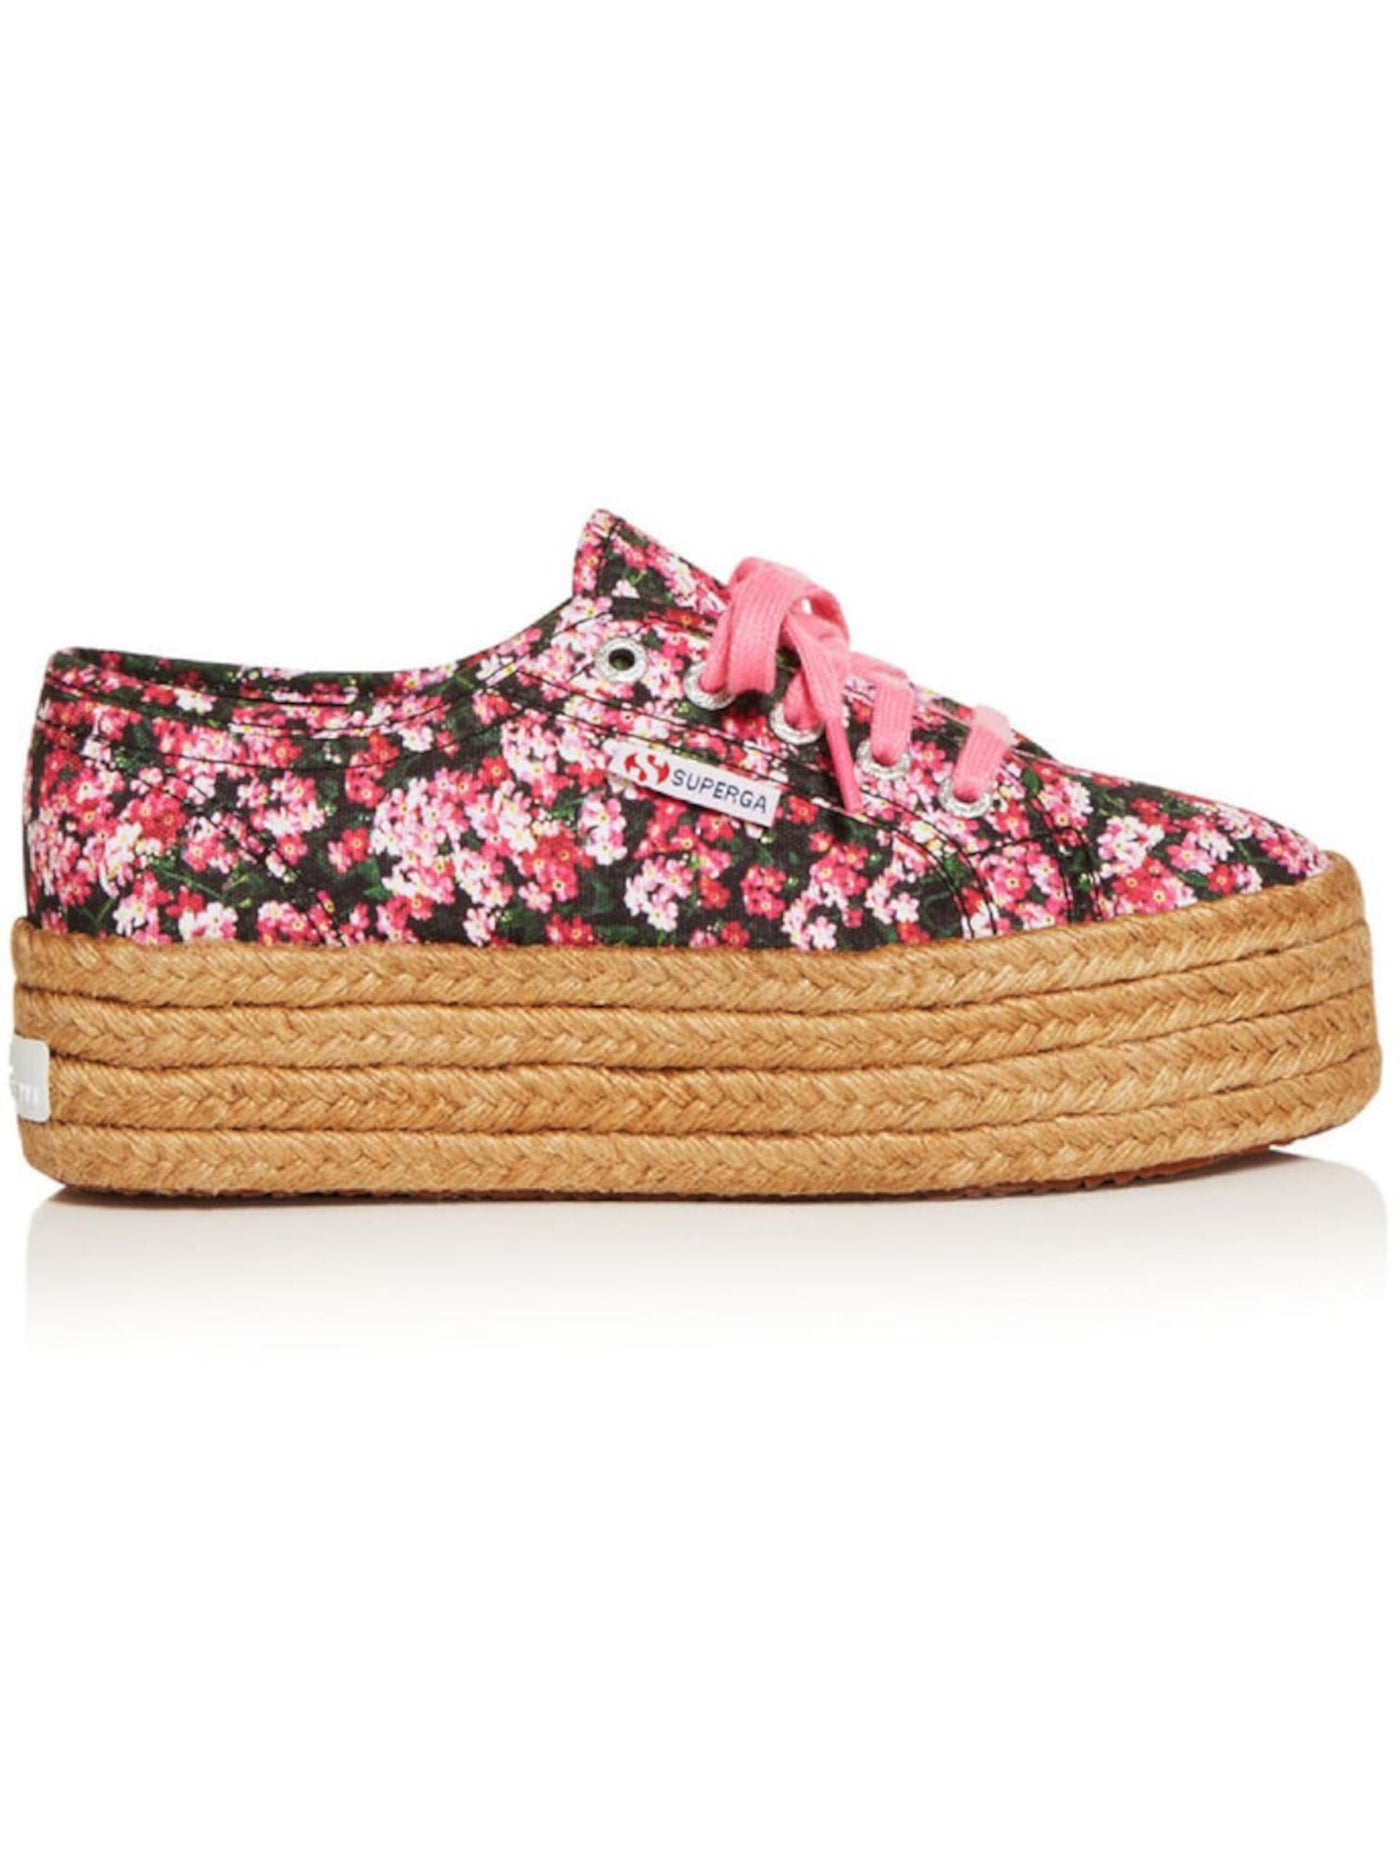 SUPERGA Womens Pink Floral Jute Wrapped Comfort Mary Katrantzou Round Toe Platform Lace-Up Athletic Sneakers Shoes 41